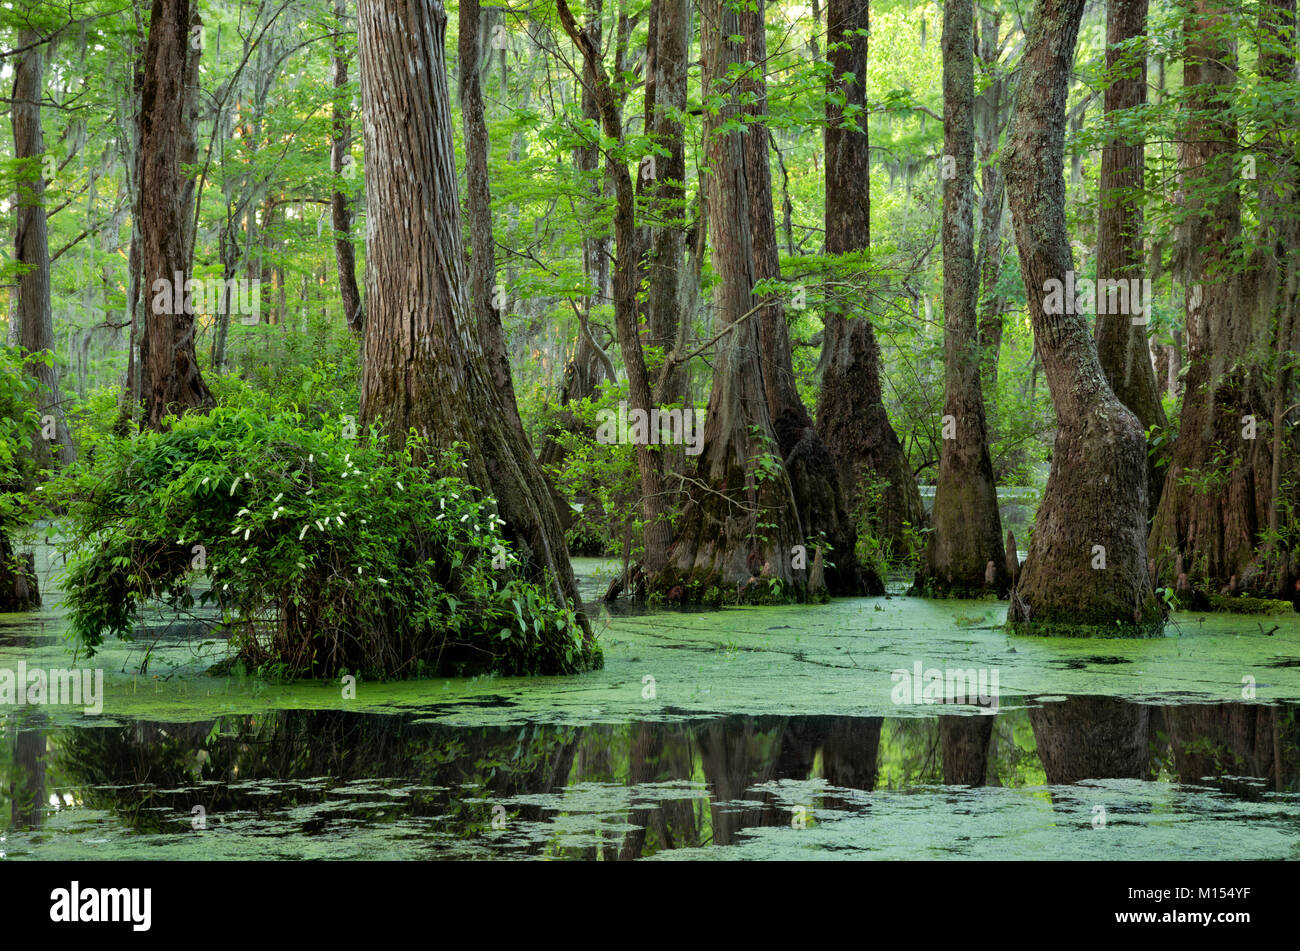 NC01480-00...NORTH CAROLINA - Bald cypress and tupalo gum trees surrounded by a floating mat of duckweed in Merchant Millpond; at Merchant Millpond St Stock Photo